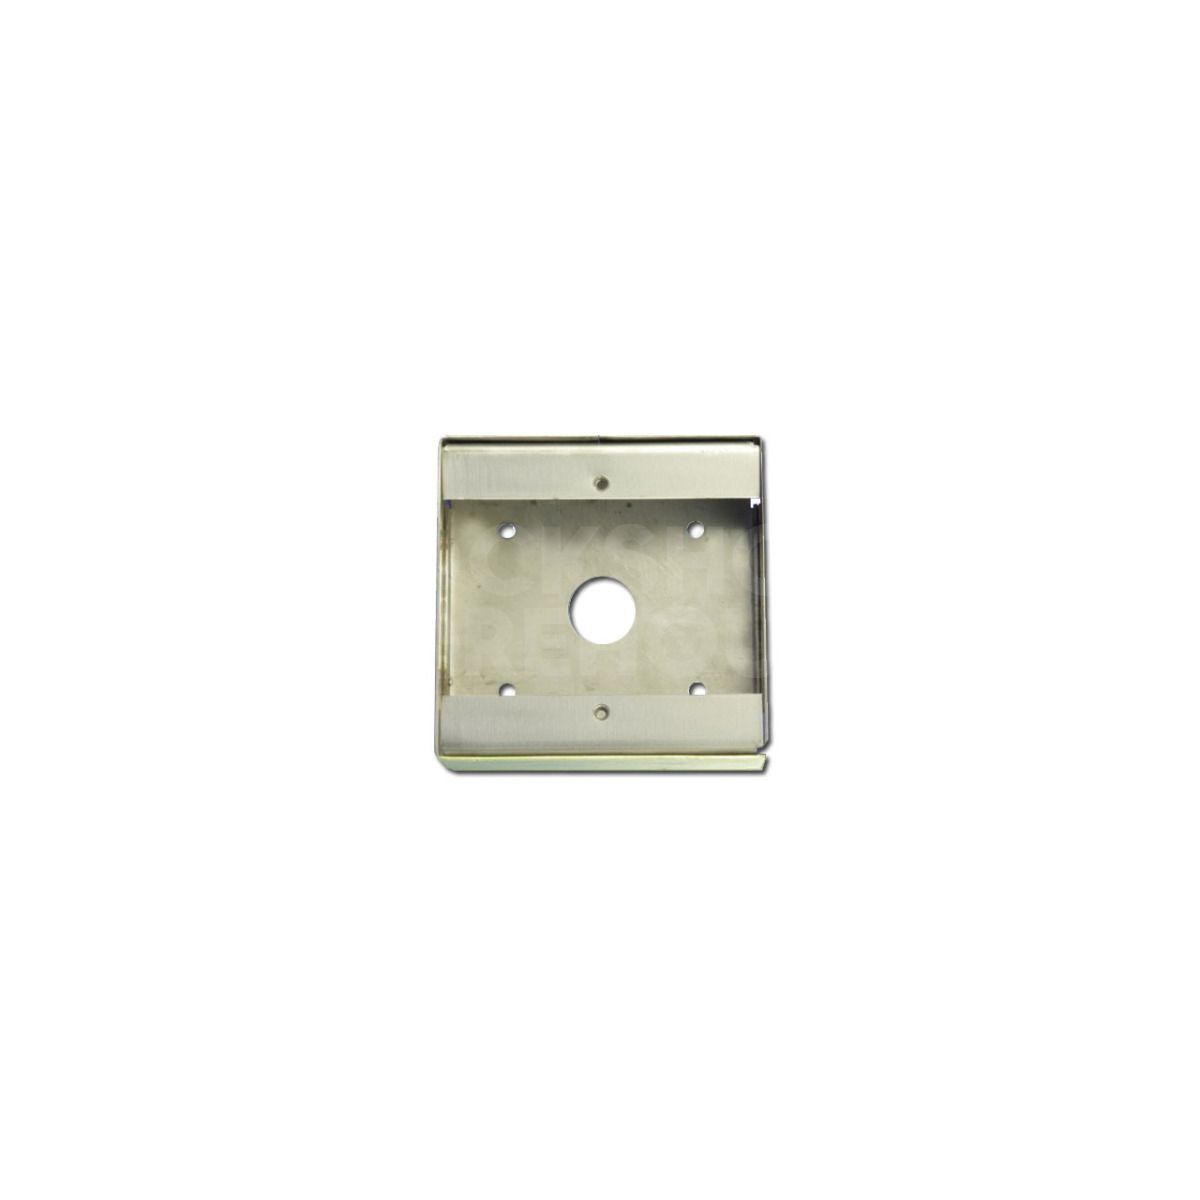 ASEC 28mm Stainless Steel Surface Housing for Exit Buttons